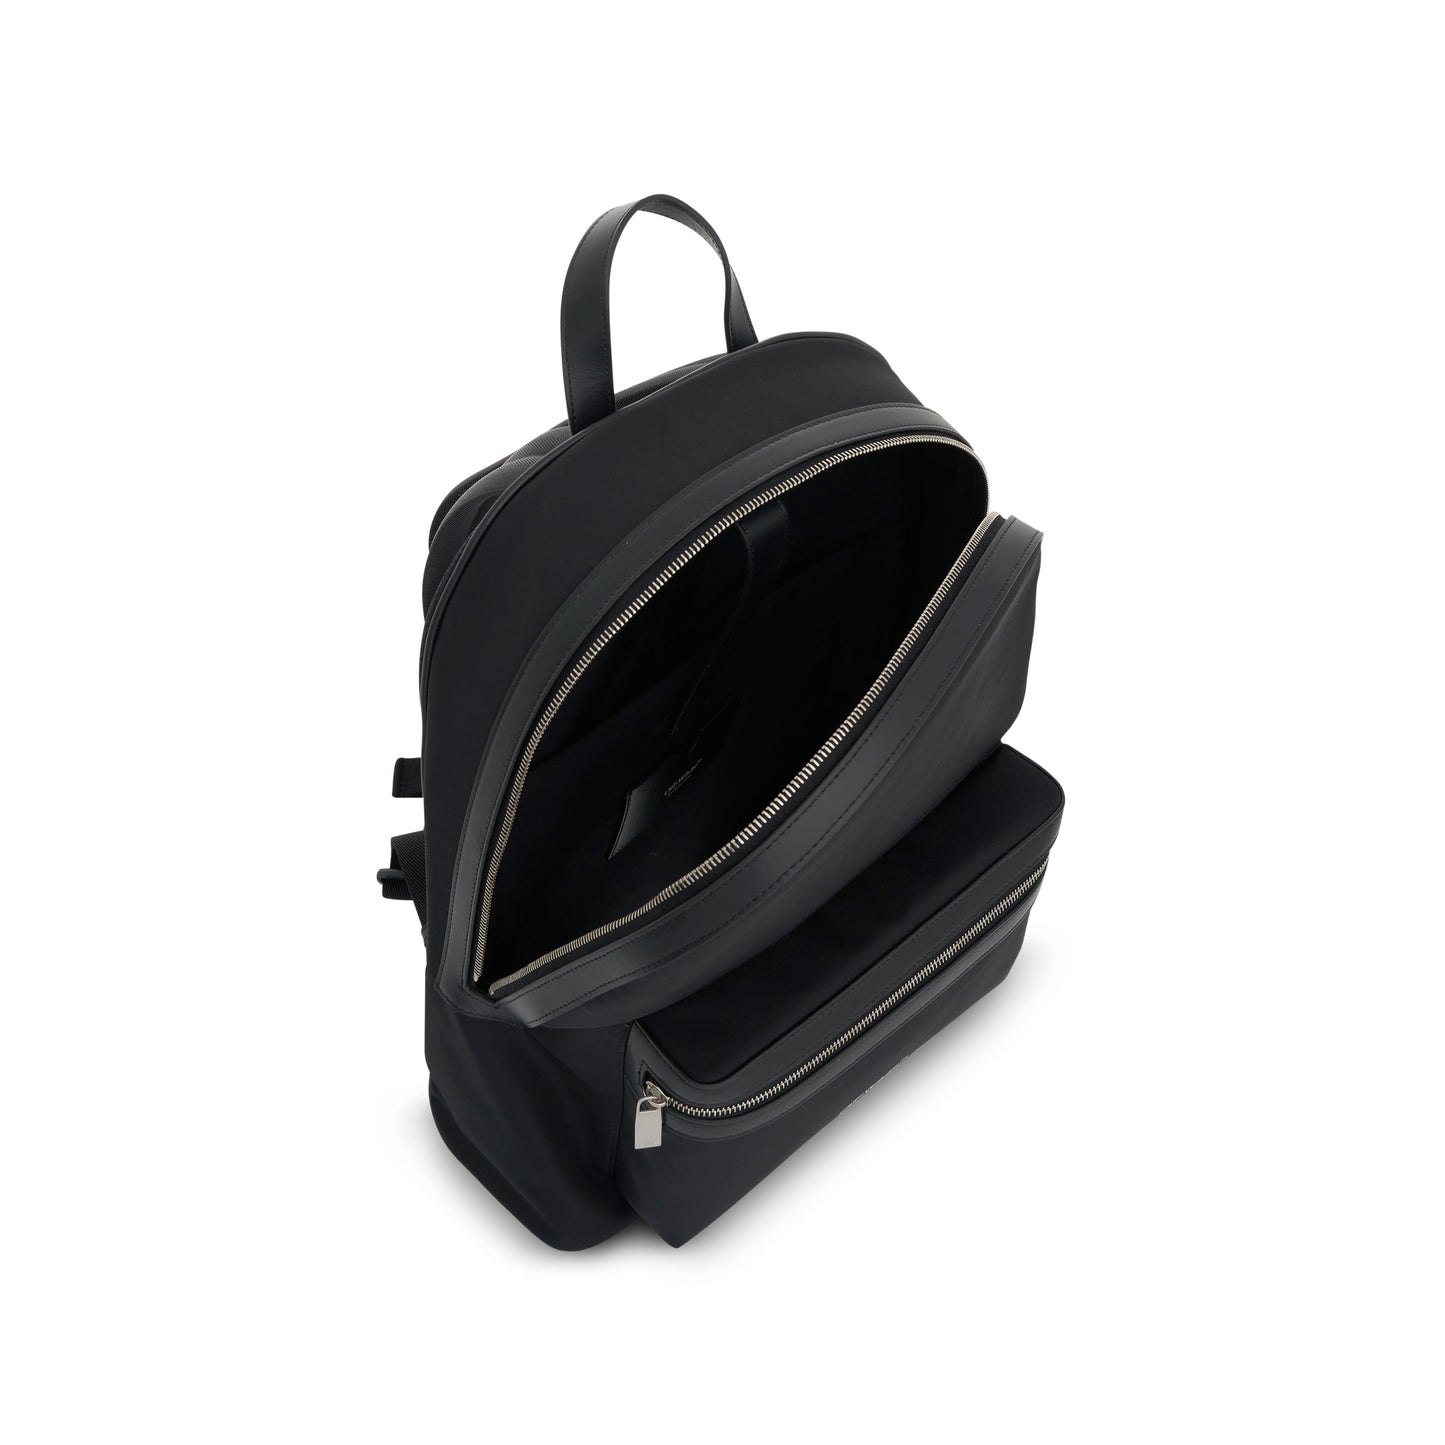 Core Round Backpack in Black